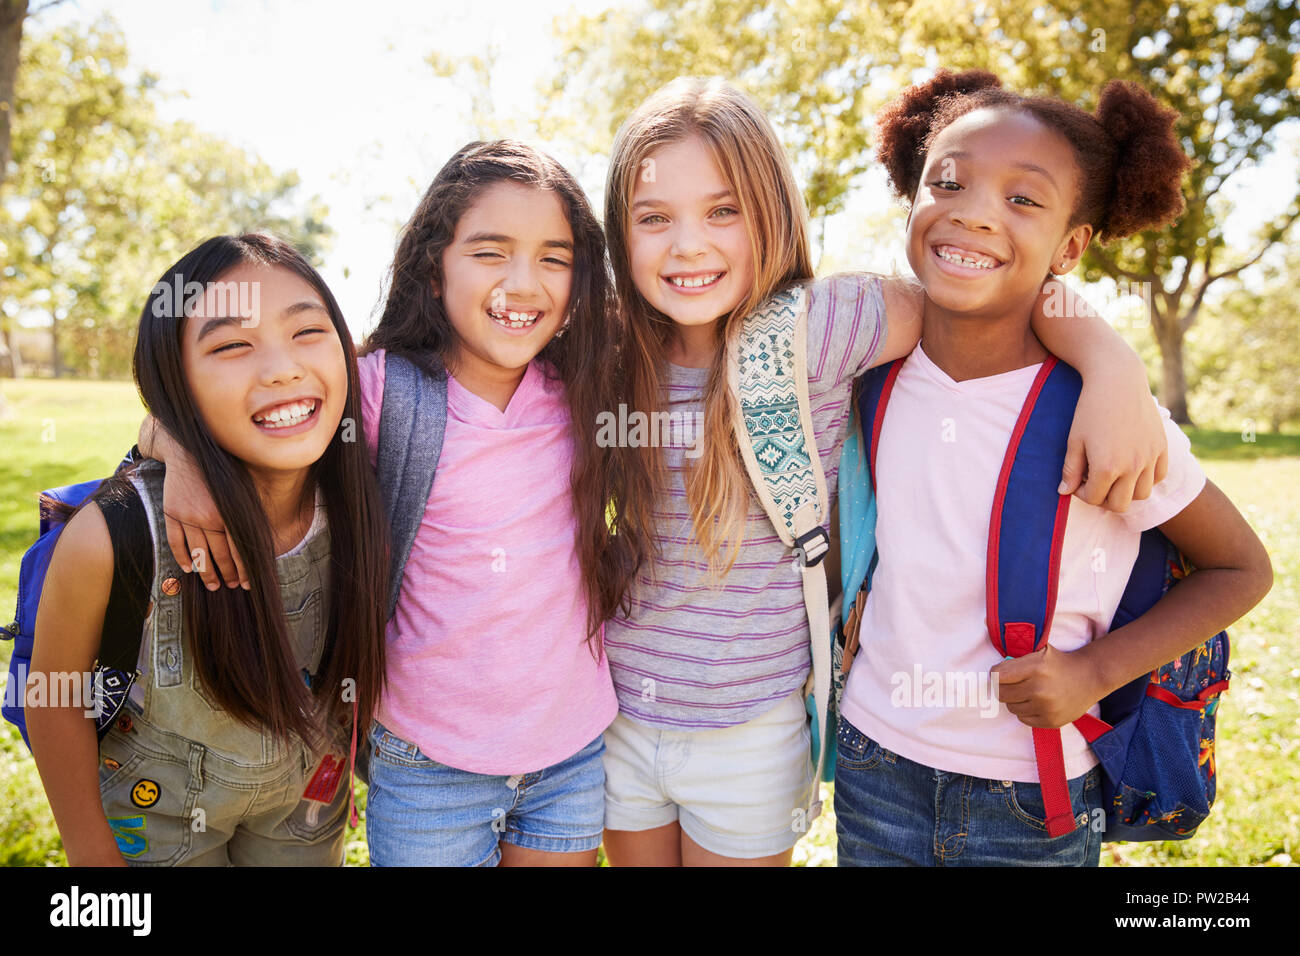 Four young smiling schoolgirls on a school trip Stock Photo